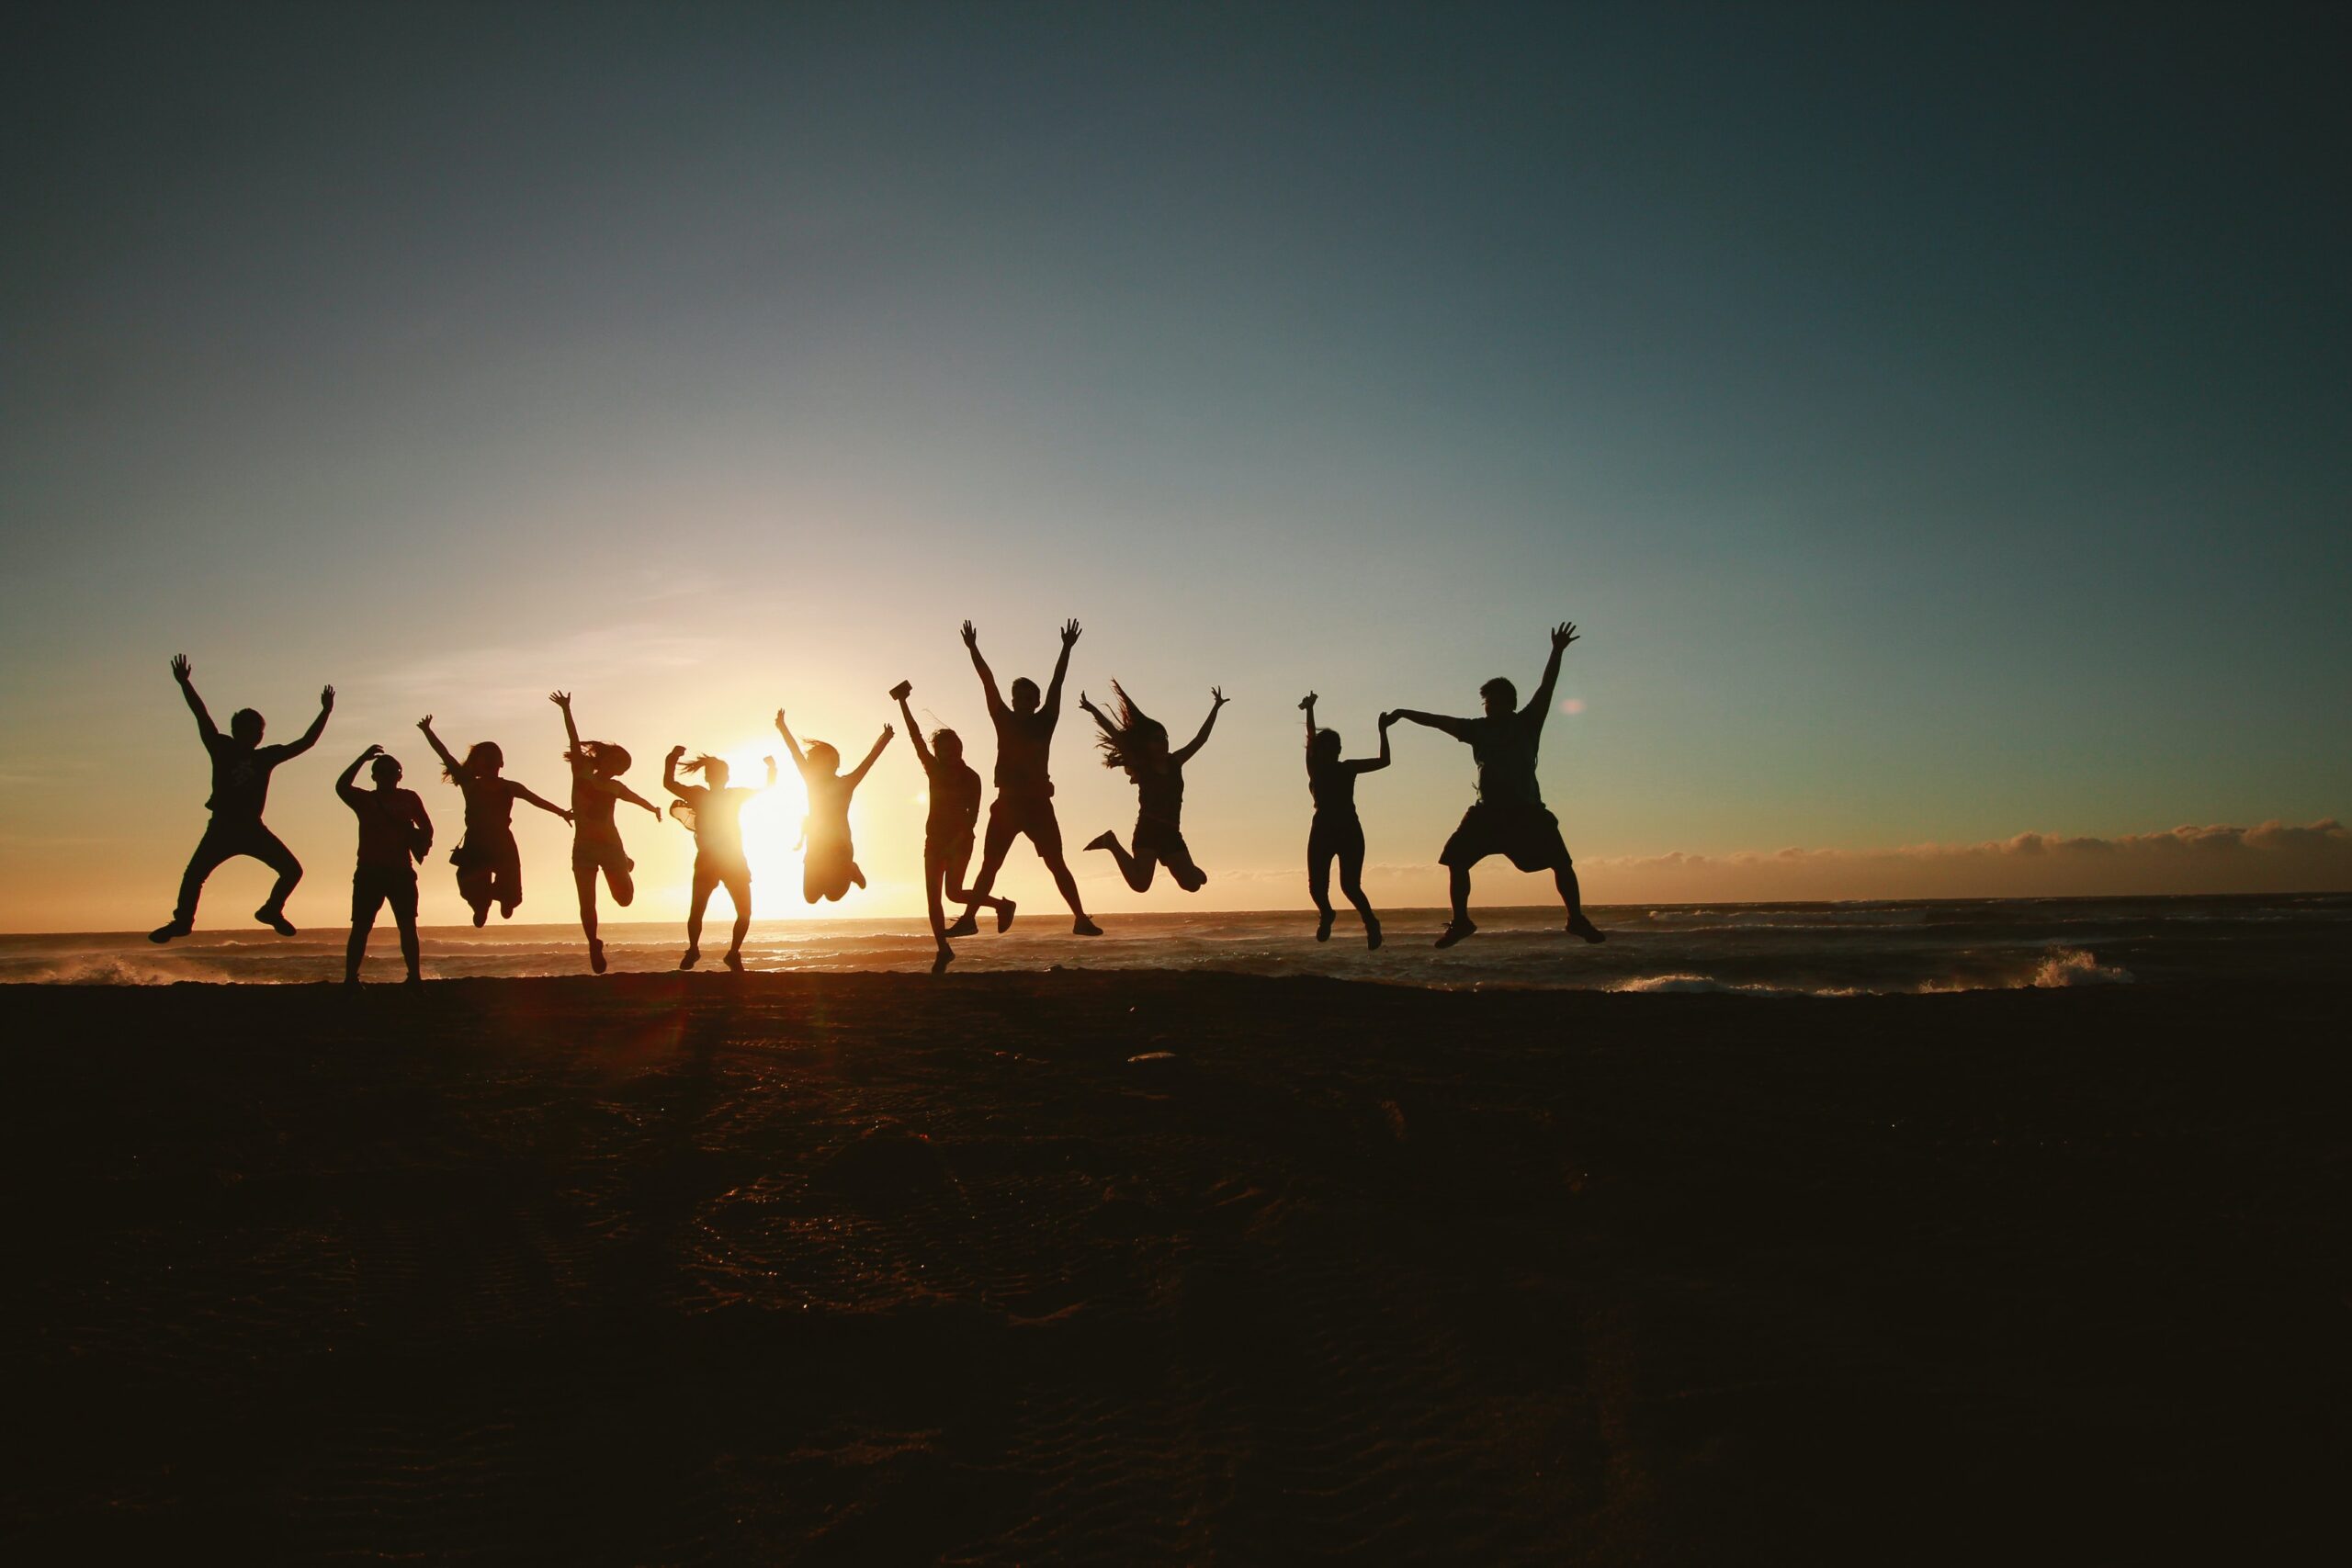 A group of people jumping on the beach at sunset.